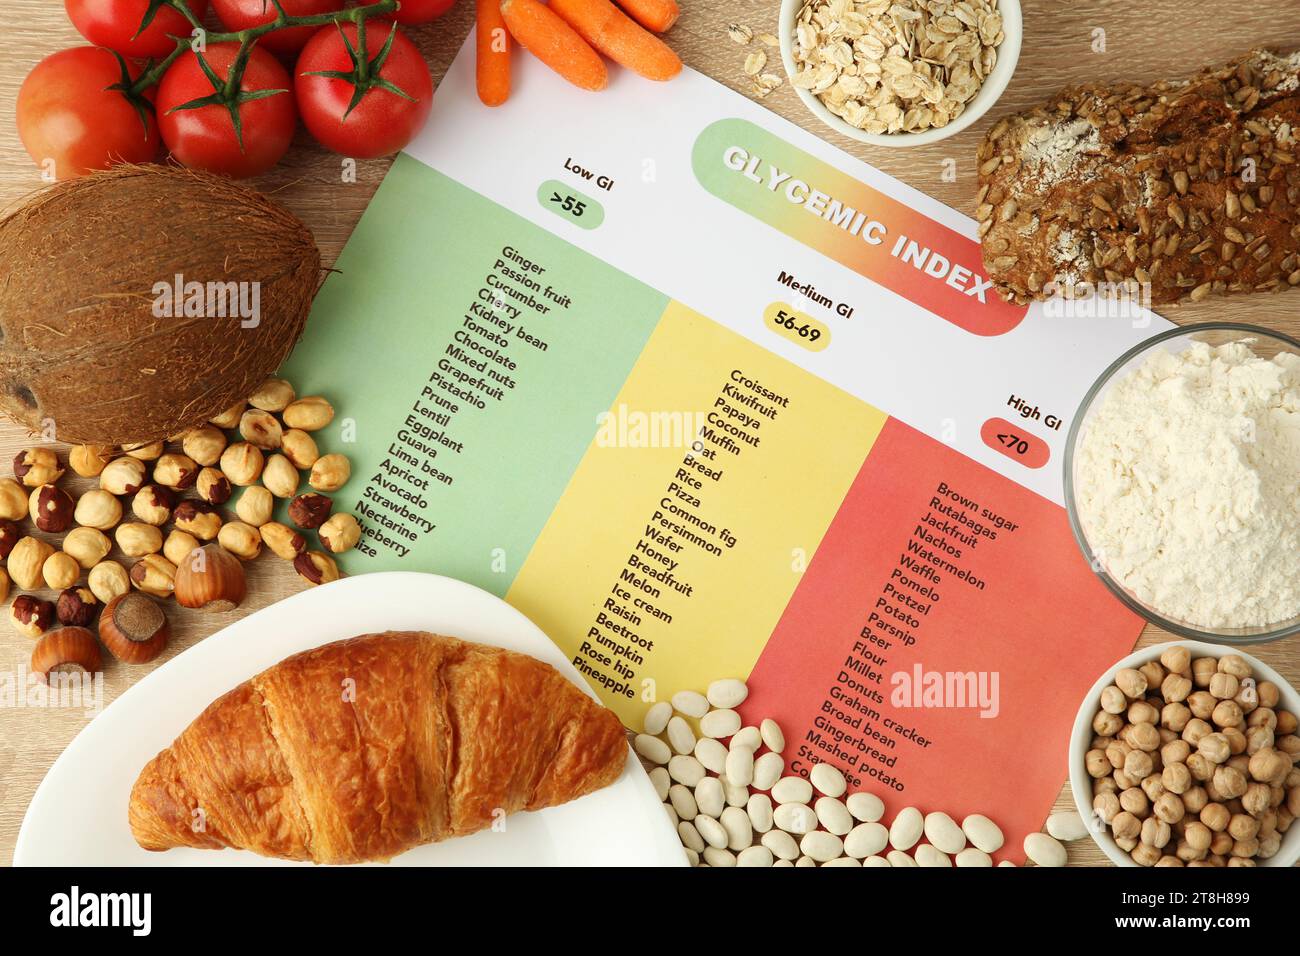 Glycemic index chart surrounded by different products on wooden table, flat lay Stock Photo